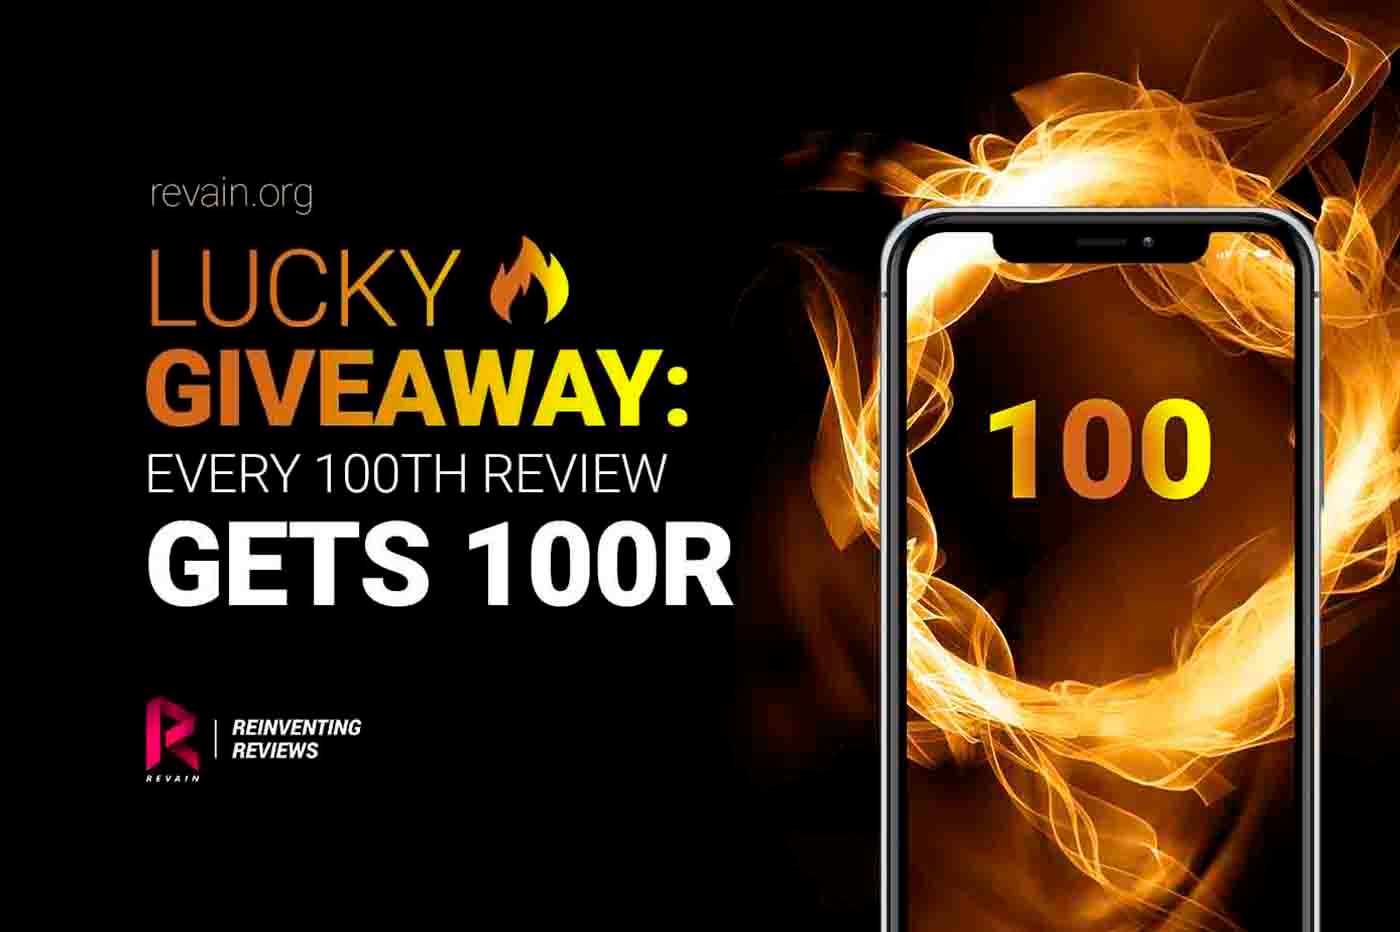 Revain launches new giveaway. 100 R reward for every 100th review